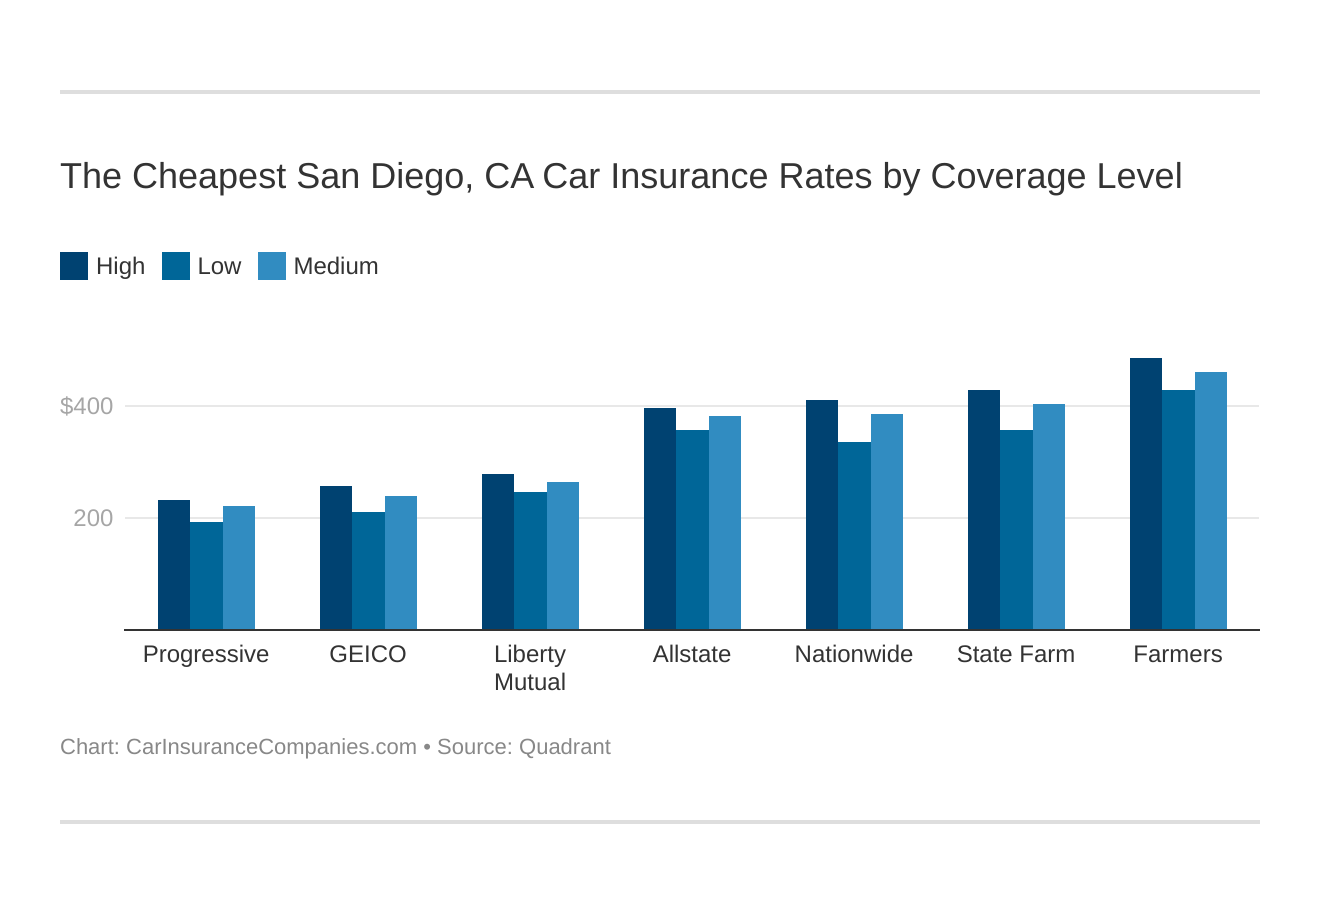 The Cheapest San Diego, CA Car Insurance Rates by Coverage Level